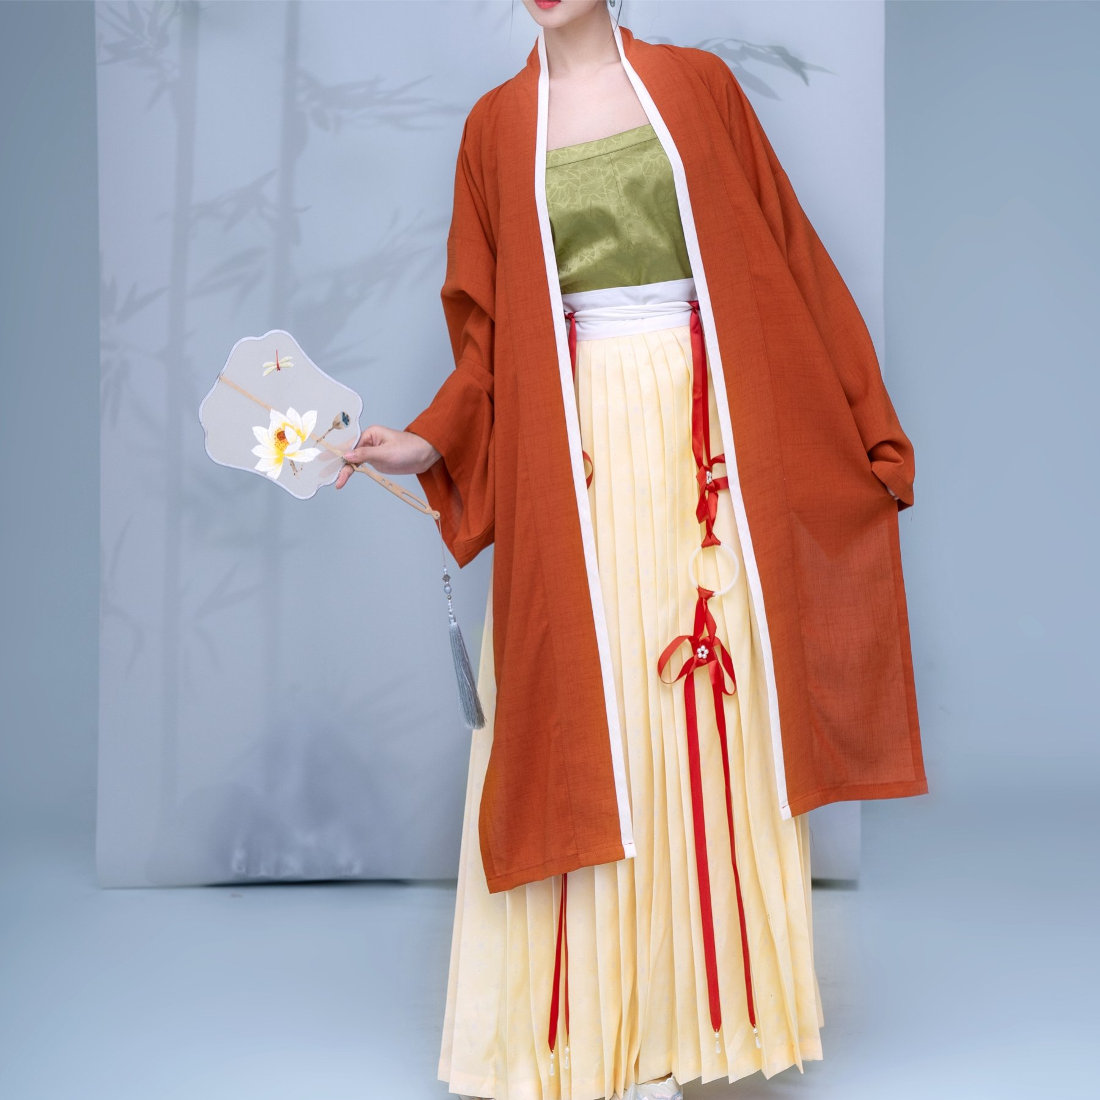 ivoci - Types of Hanfu Skirts & Their Differences - 10